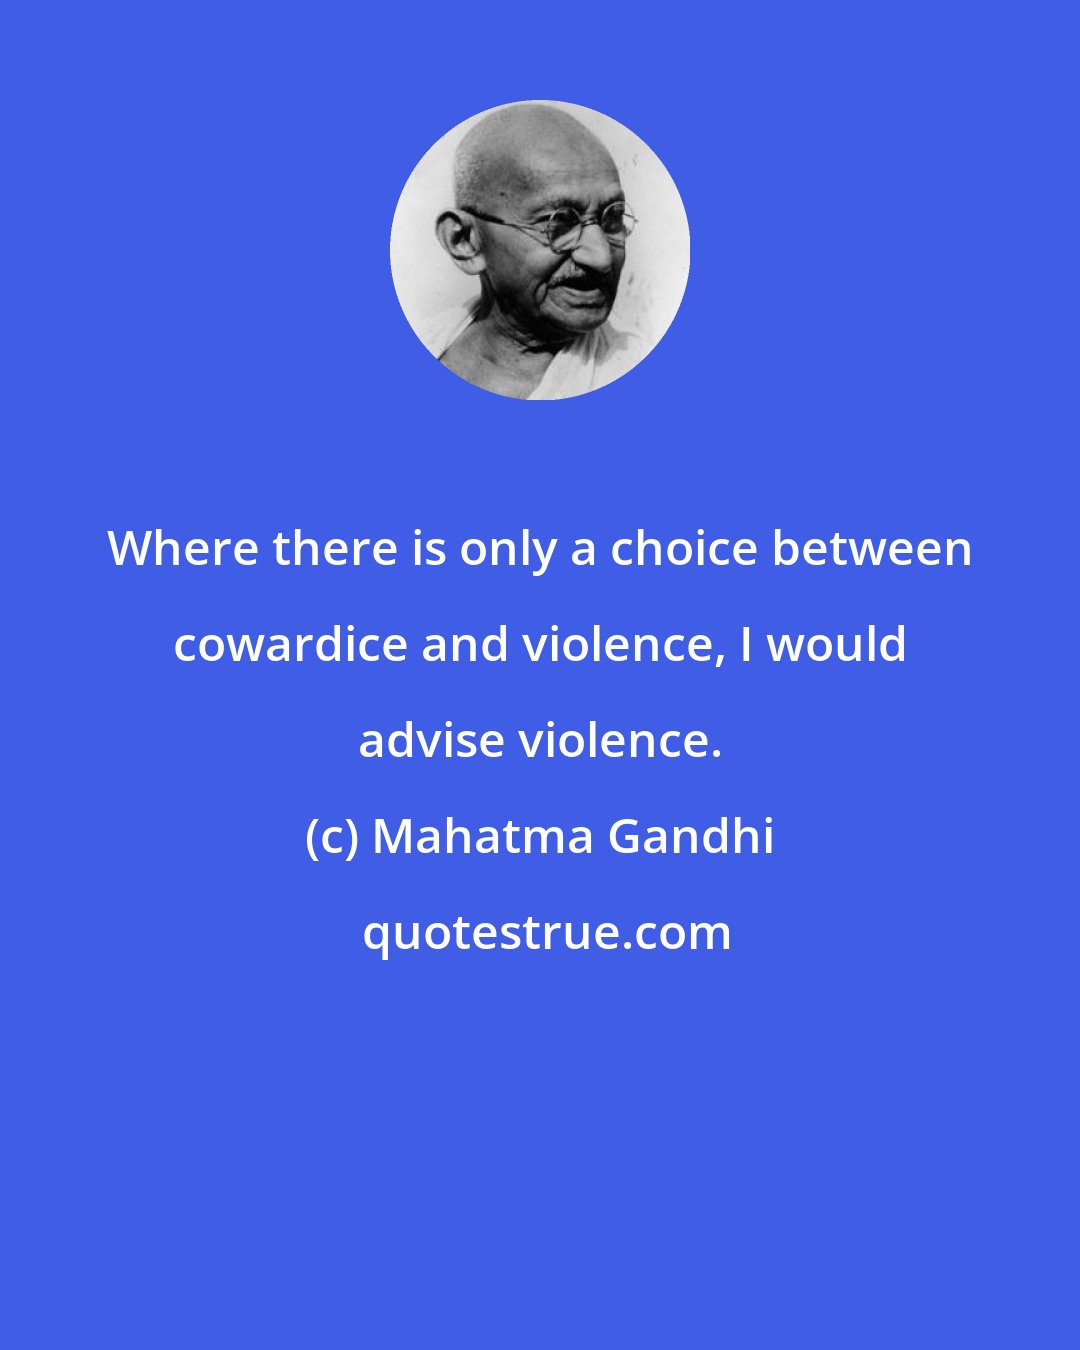 Mahatma Gandhi: Where there is only a choice between cowardice and violence, I would advise violence.